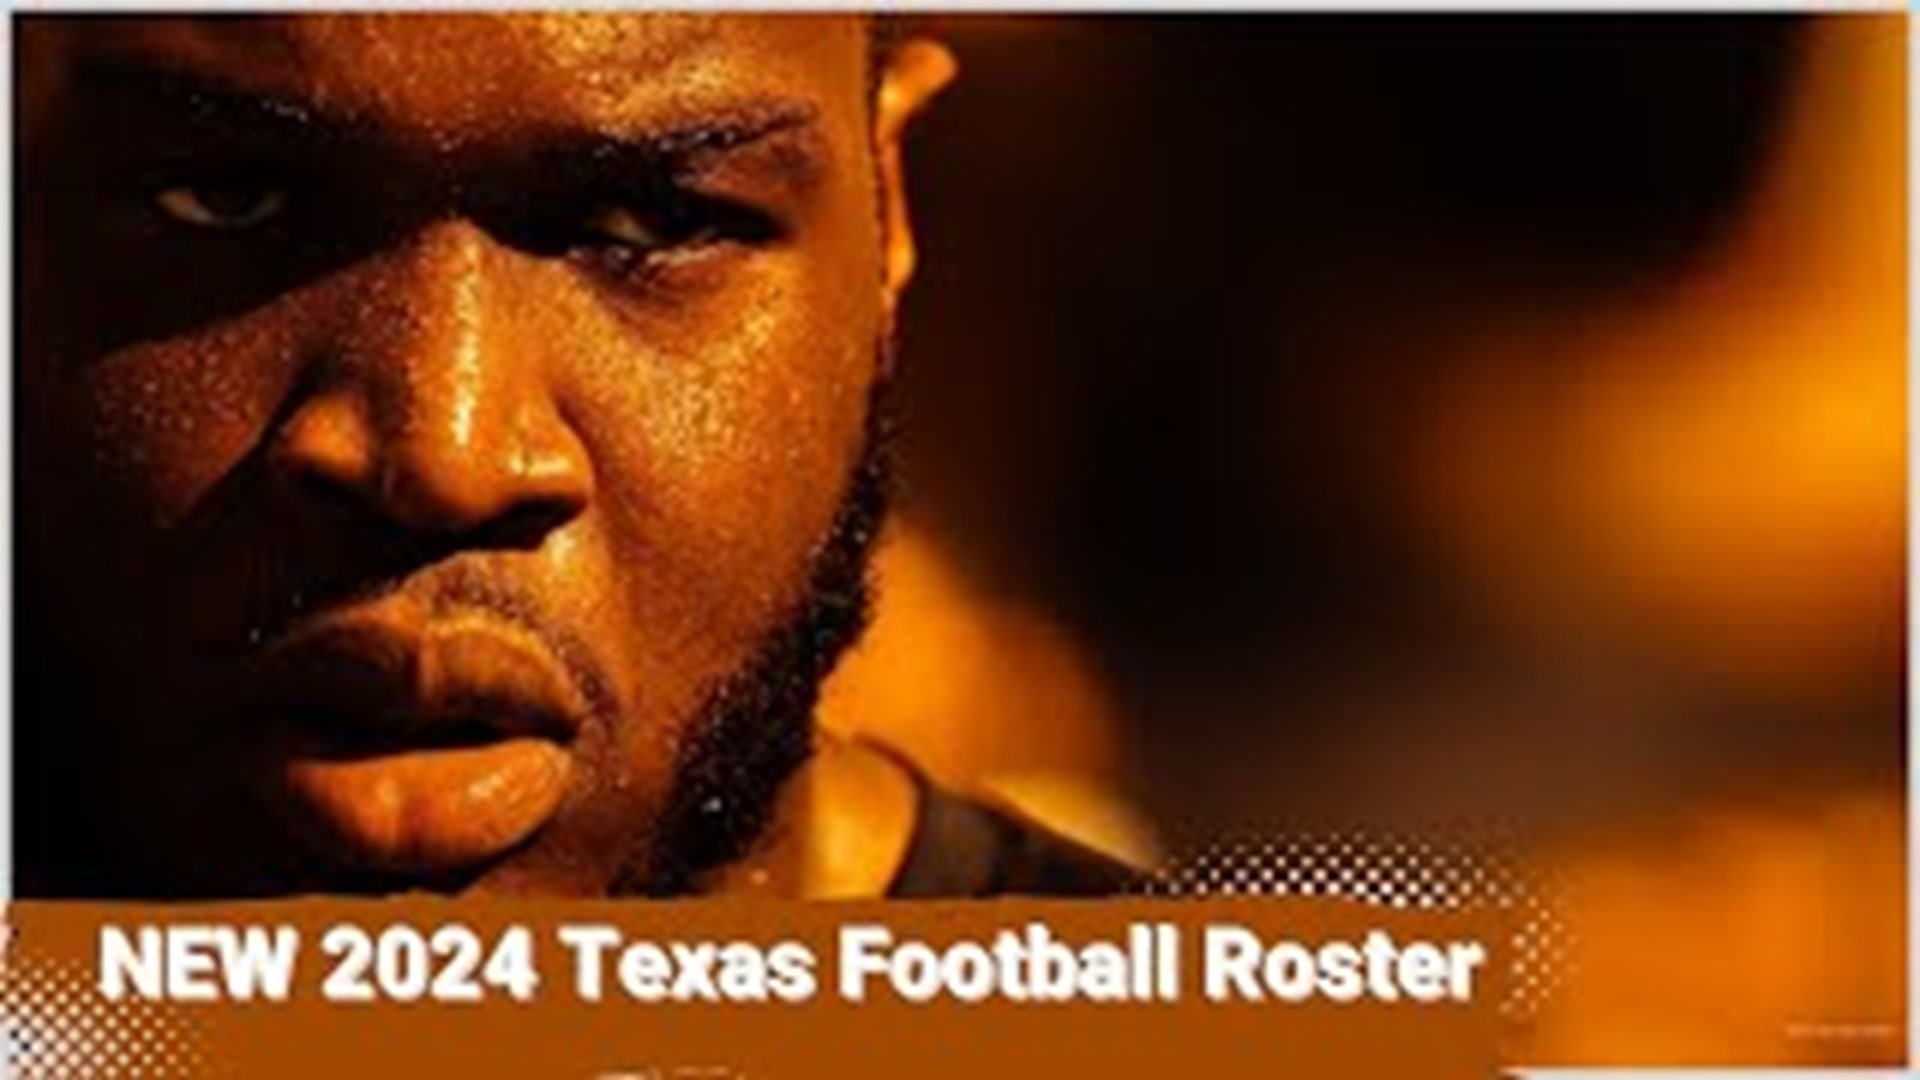 The 2024 version of the Texas Longhorns Football Roster has dropped which means we are right around the corner from spring practices.